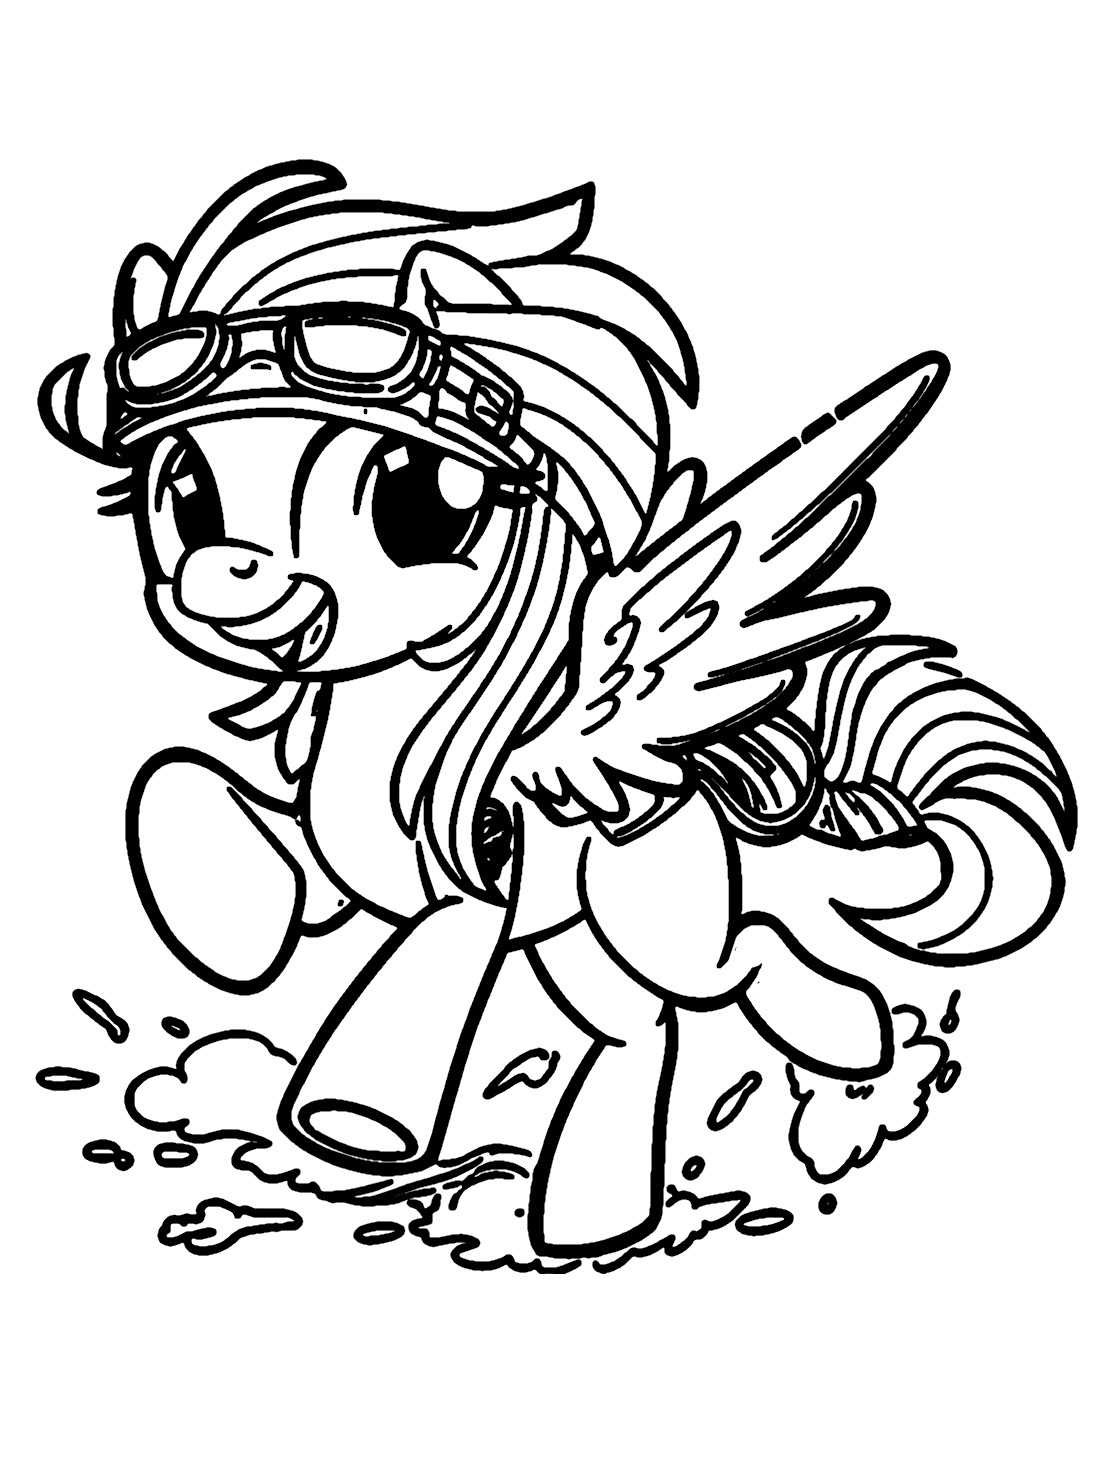 Cool Princess Rainbow Dash Coloring Pages